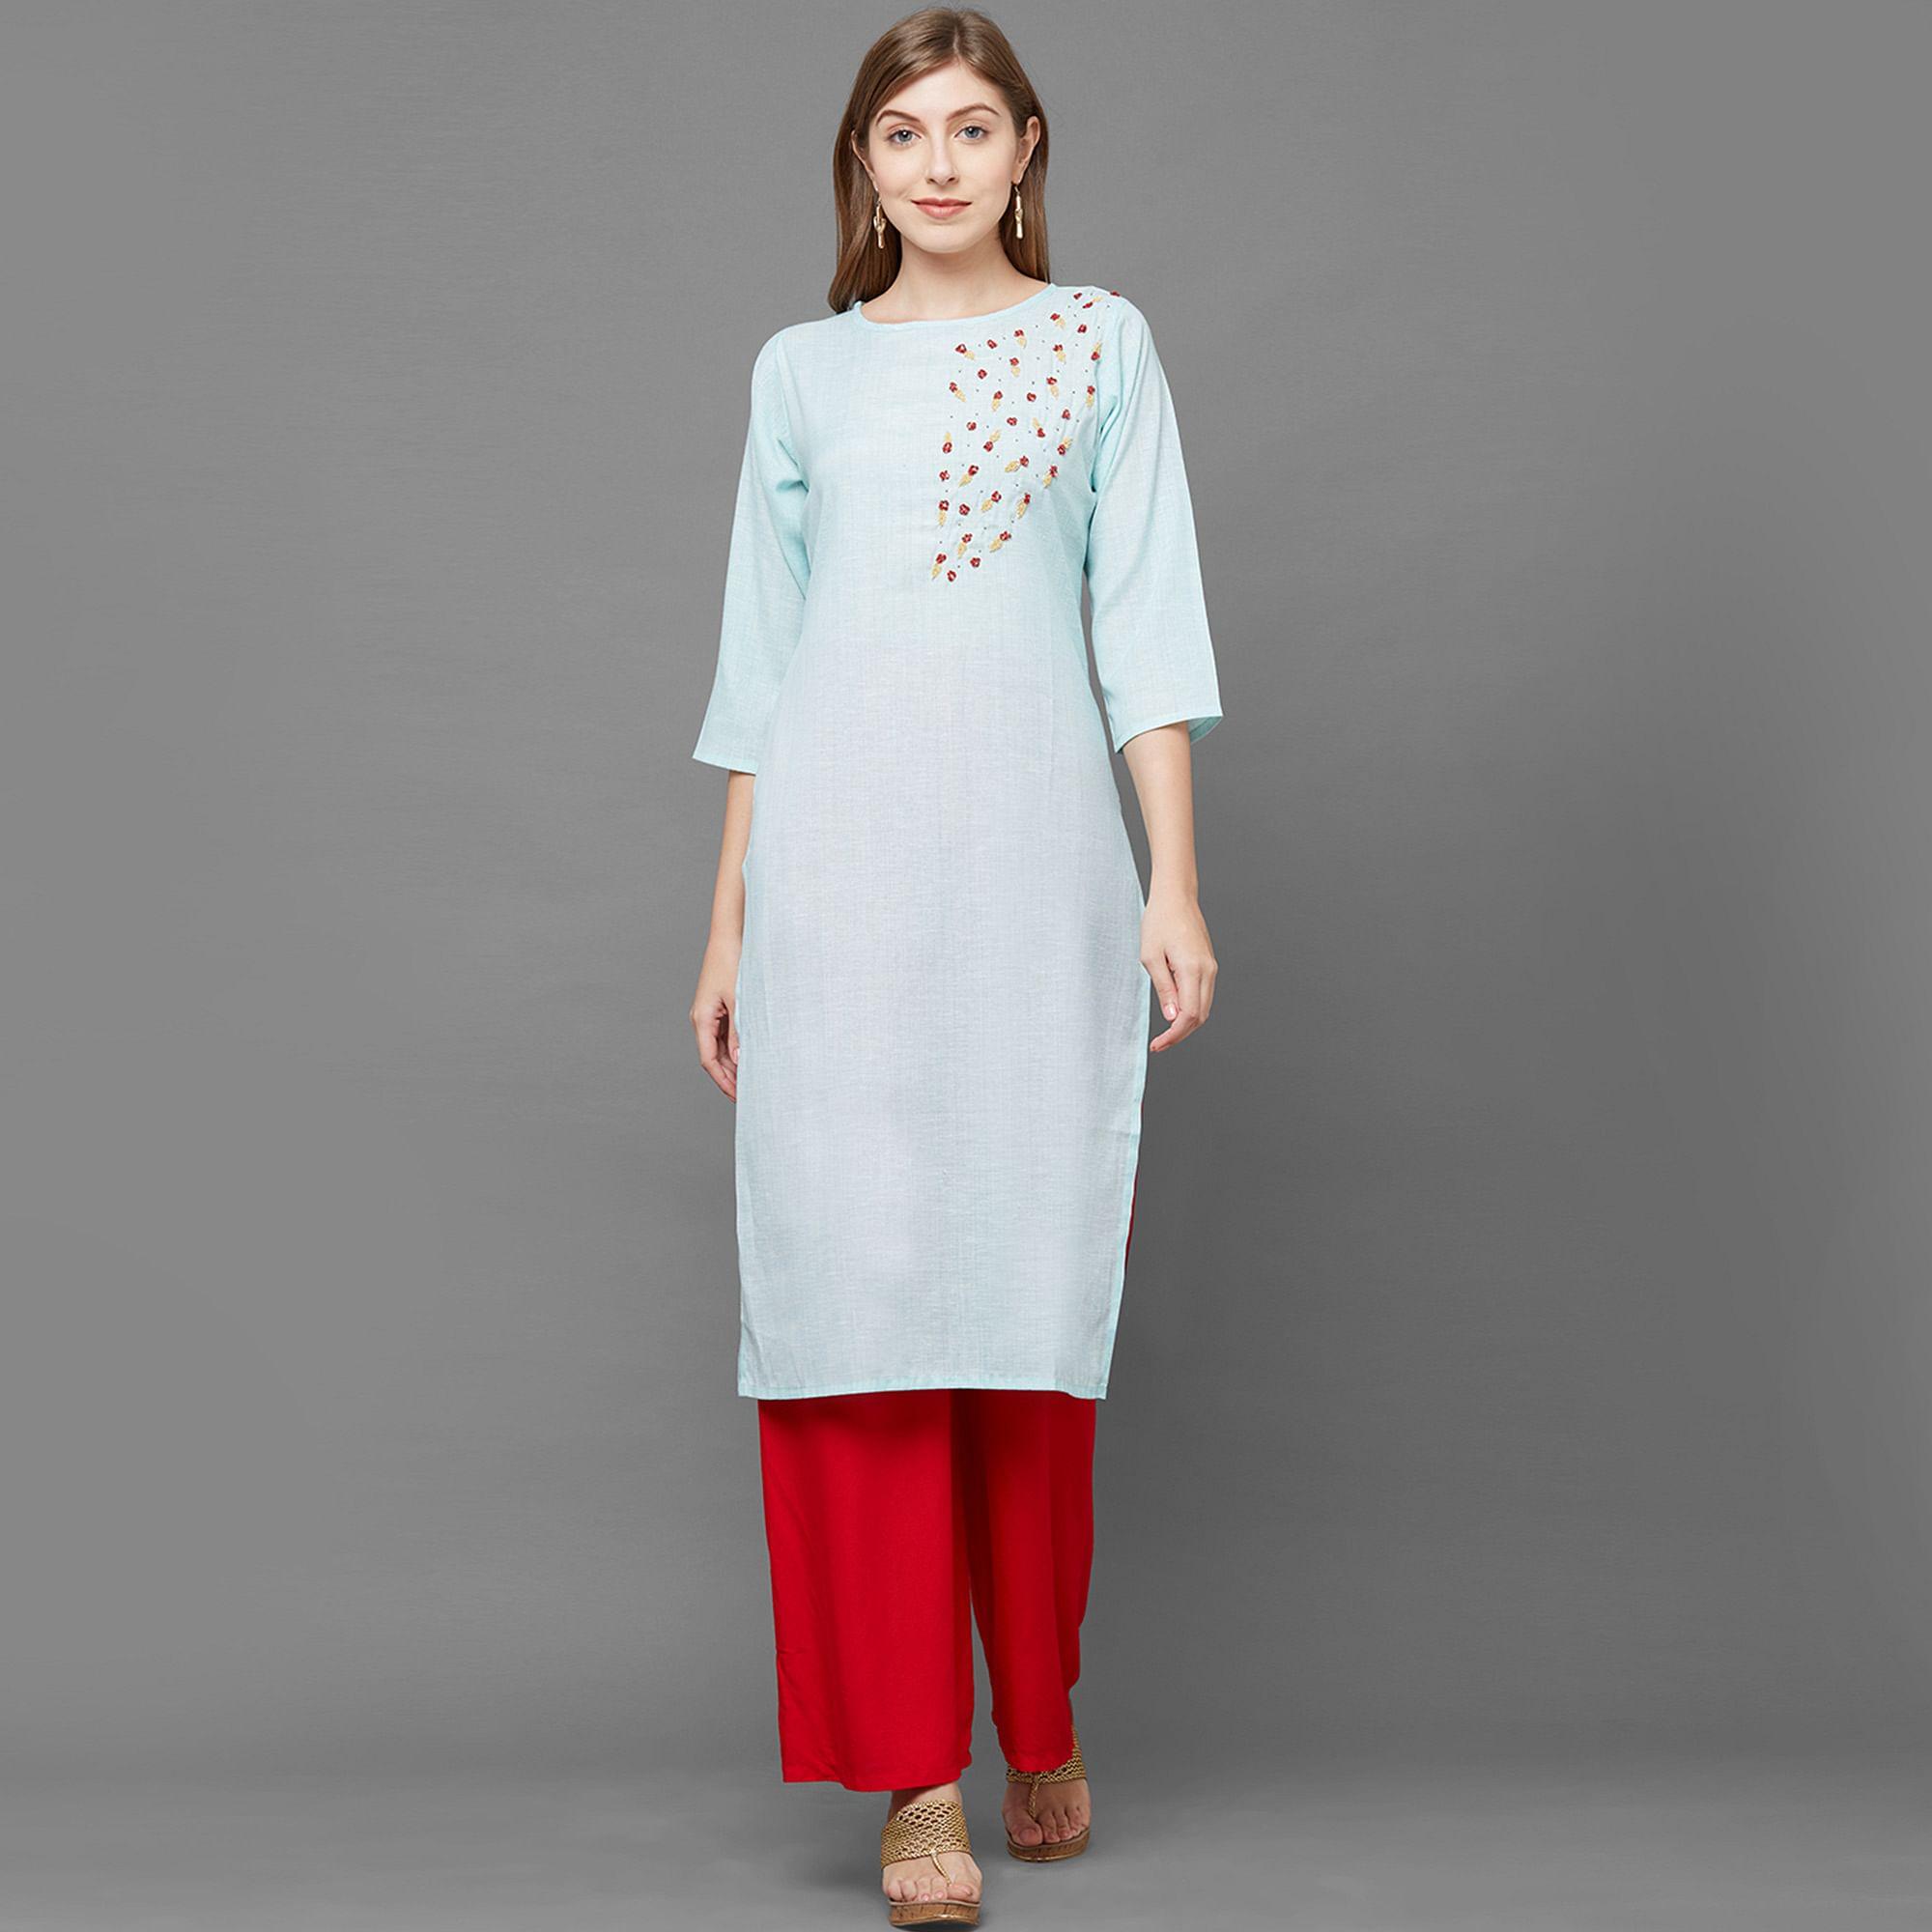 Intricate Sky Blue Colored Casual Hand Embroidered Cotton Kurti - Peachmode